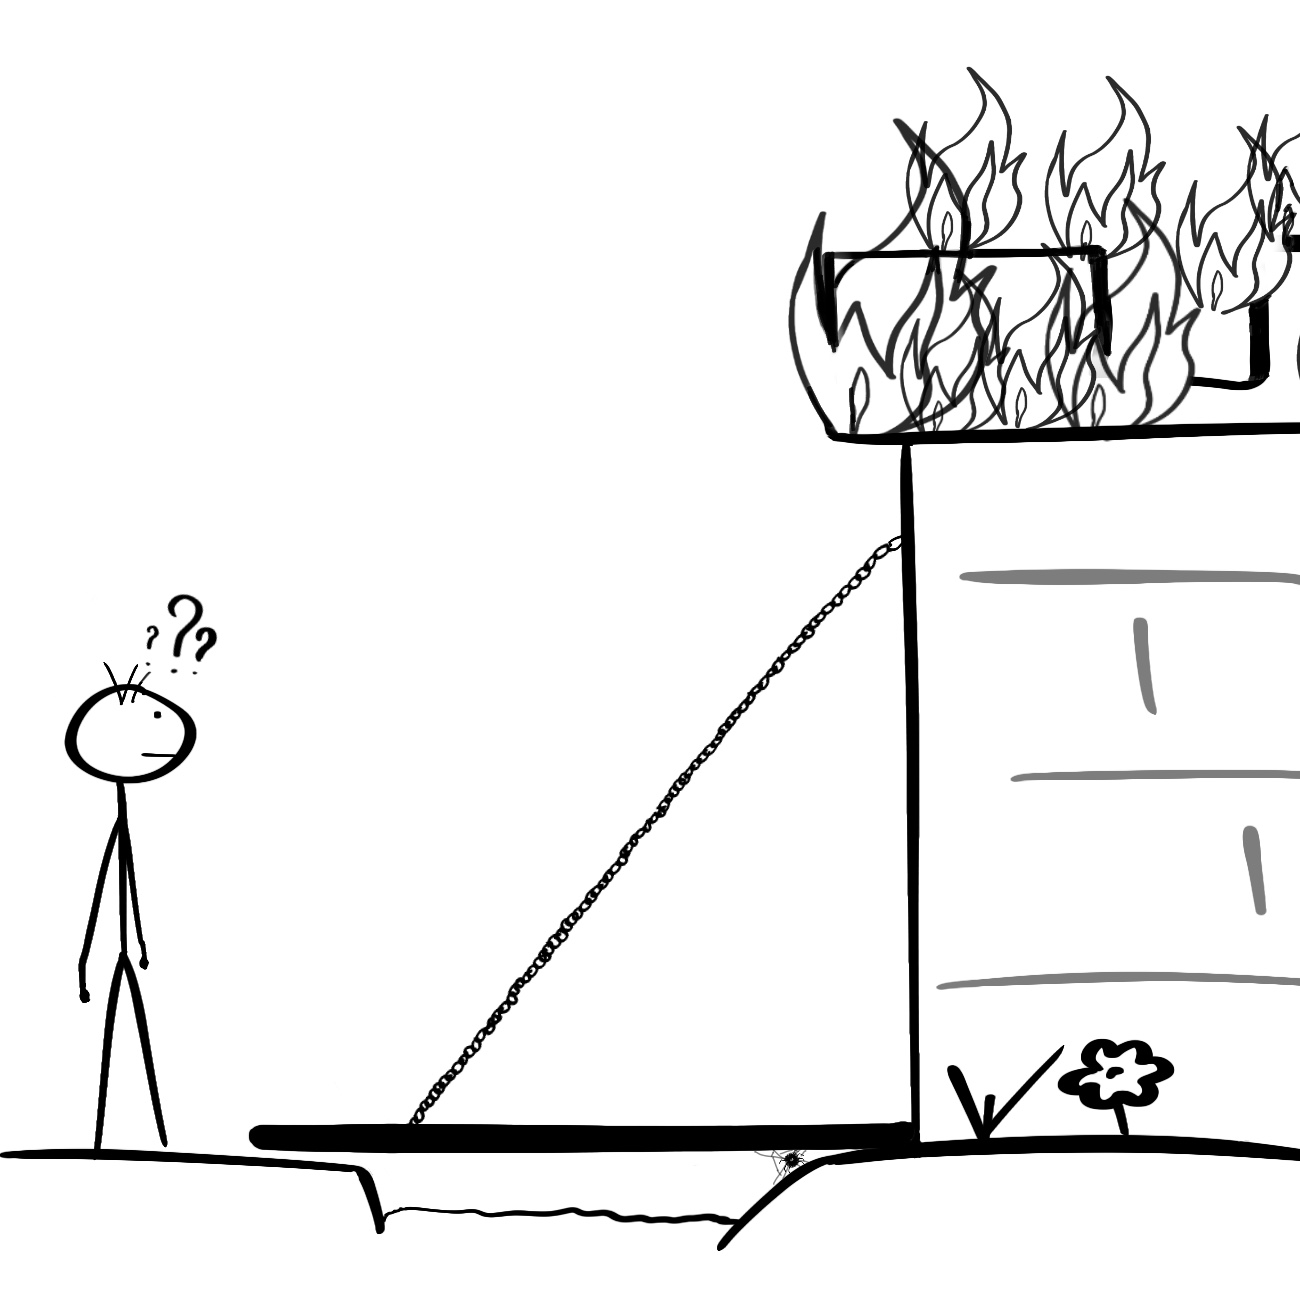 stick figure can't use the library because it's in flames